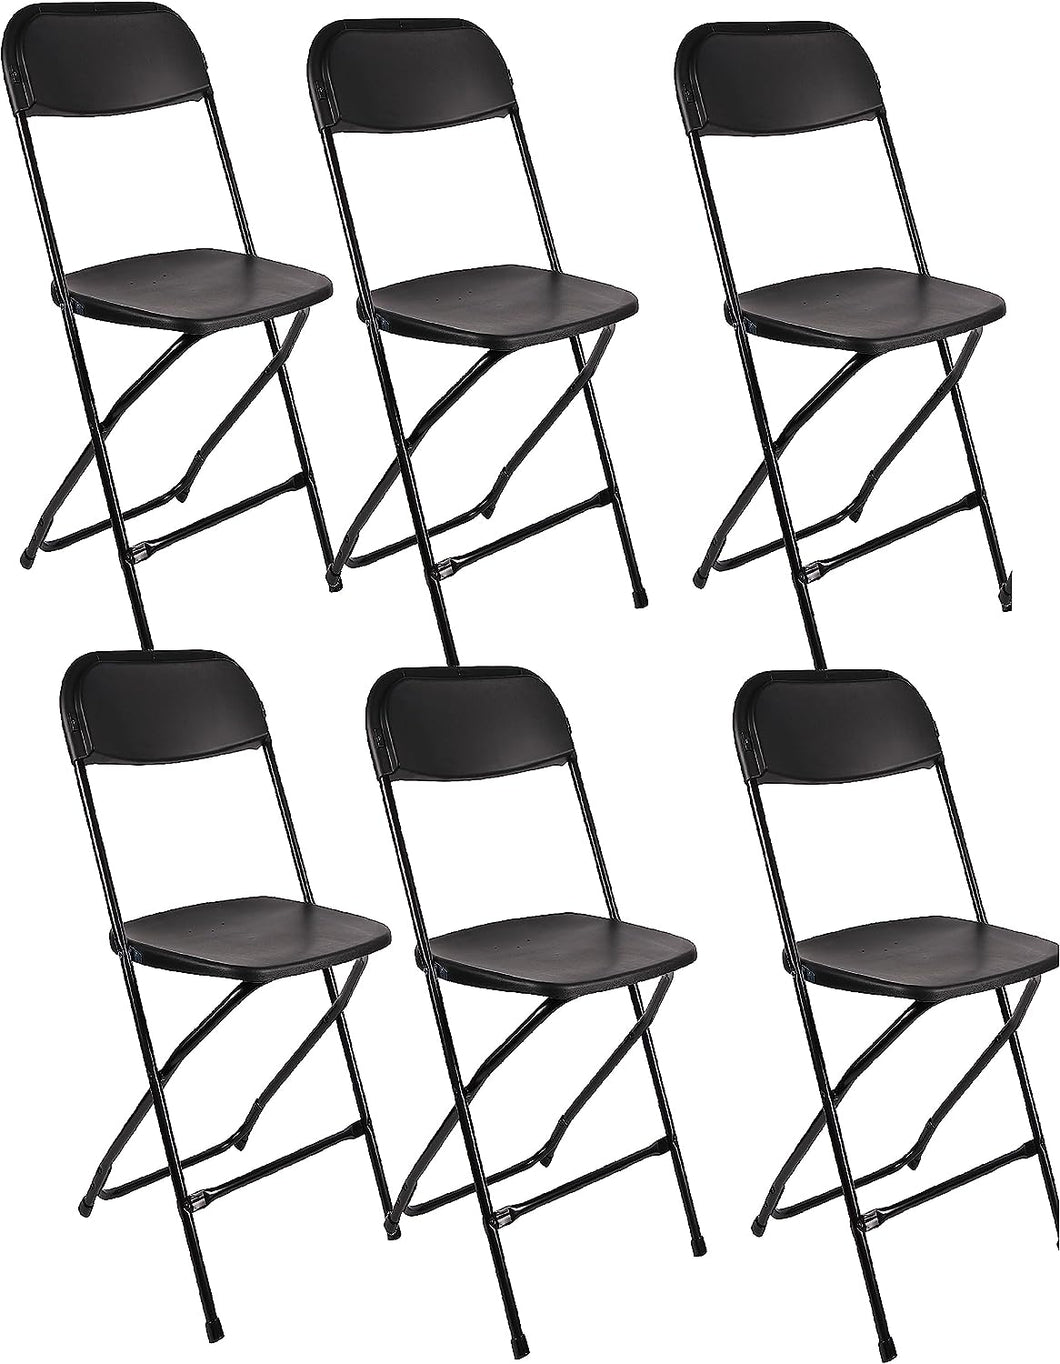 BTExpert Black Plastic Folding Chair Steel Frame Commercial High Capacity Event Chair lightweight Set for Office Wedding Party Picnic Kitchen Dining Church School Set of 6